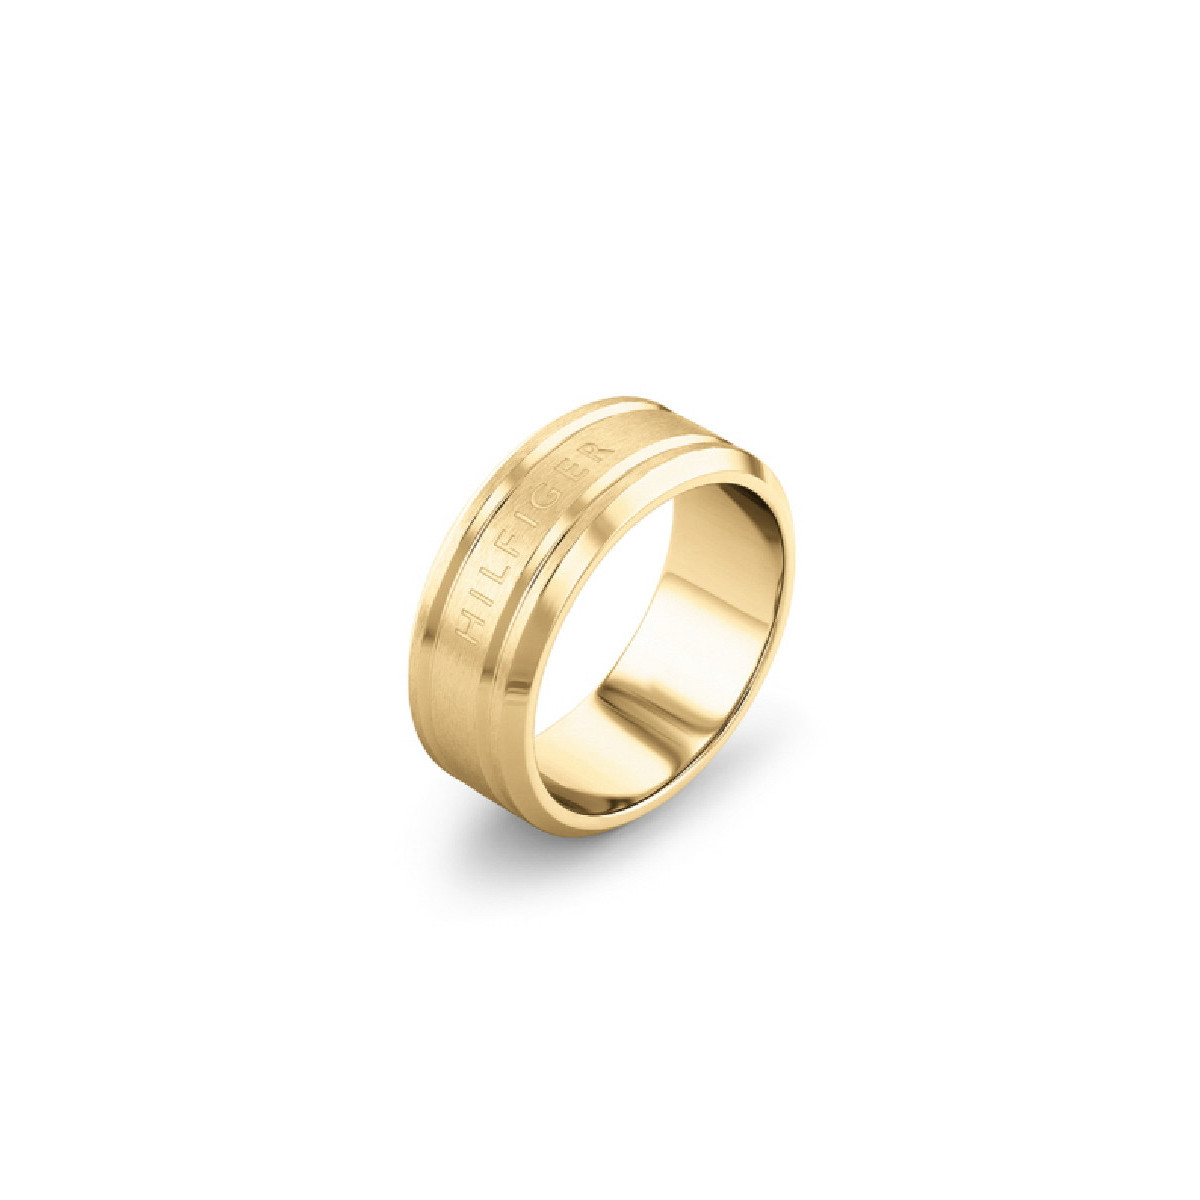 ANILLO TOMMY HILFIGER GOLD - 2790505H